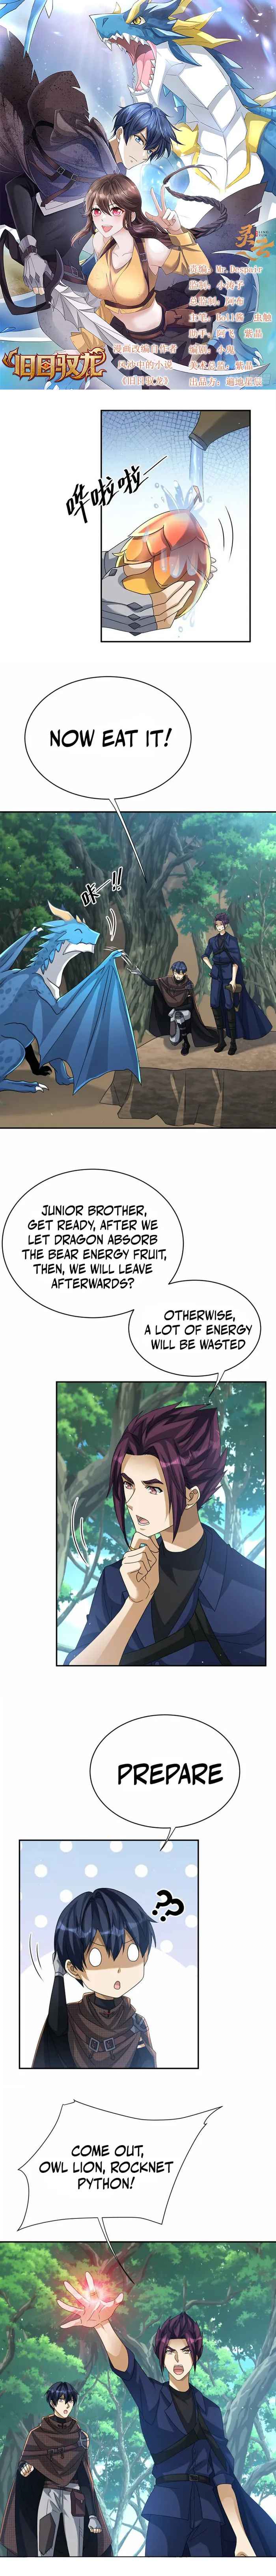 Dragon Master of the Olden Days Chapter 32-eng-li - Page 0